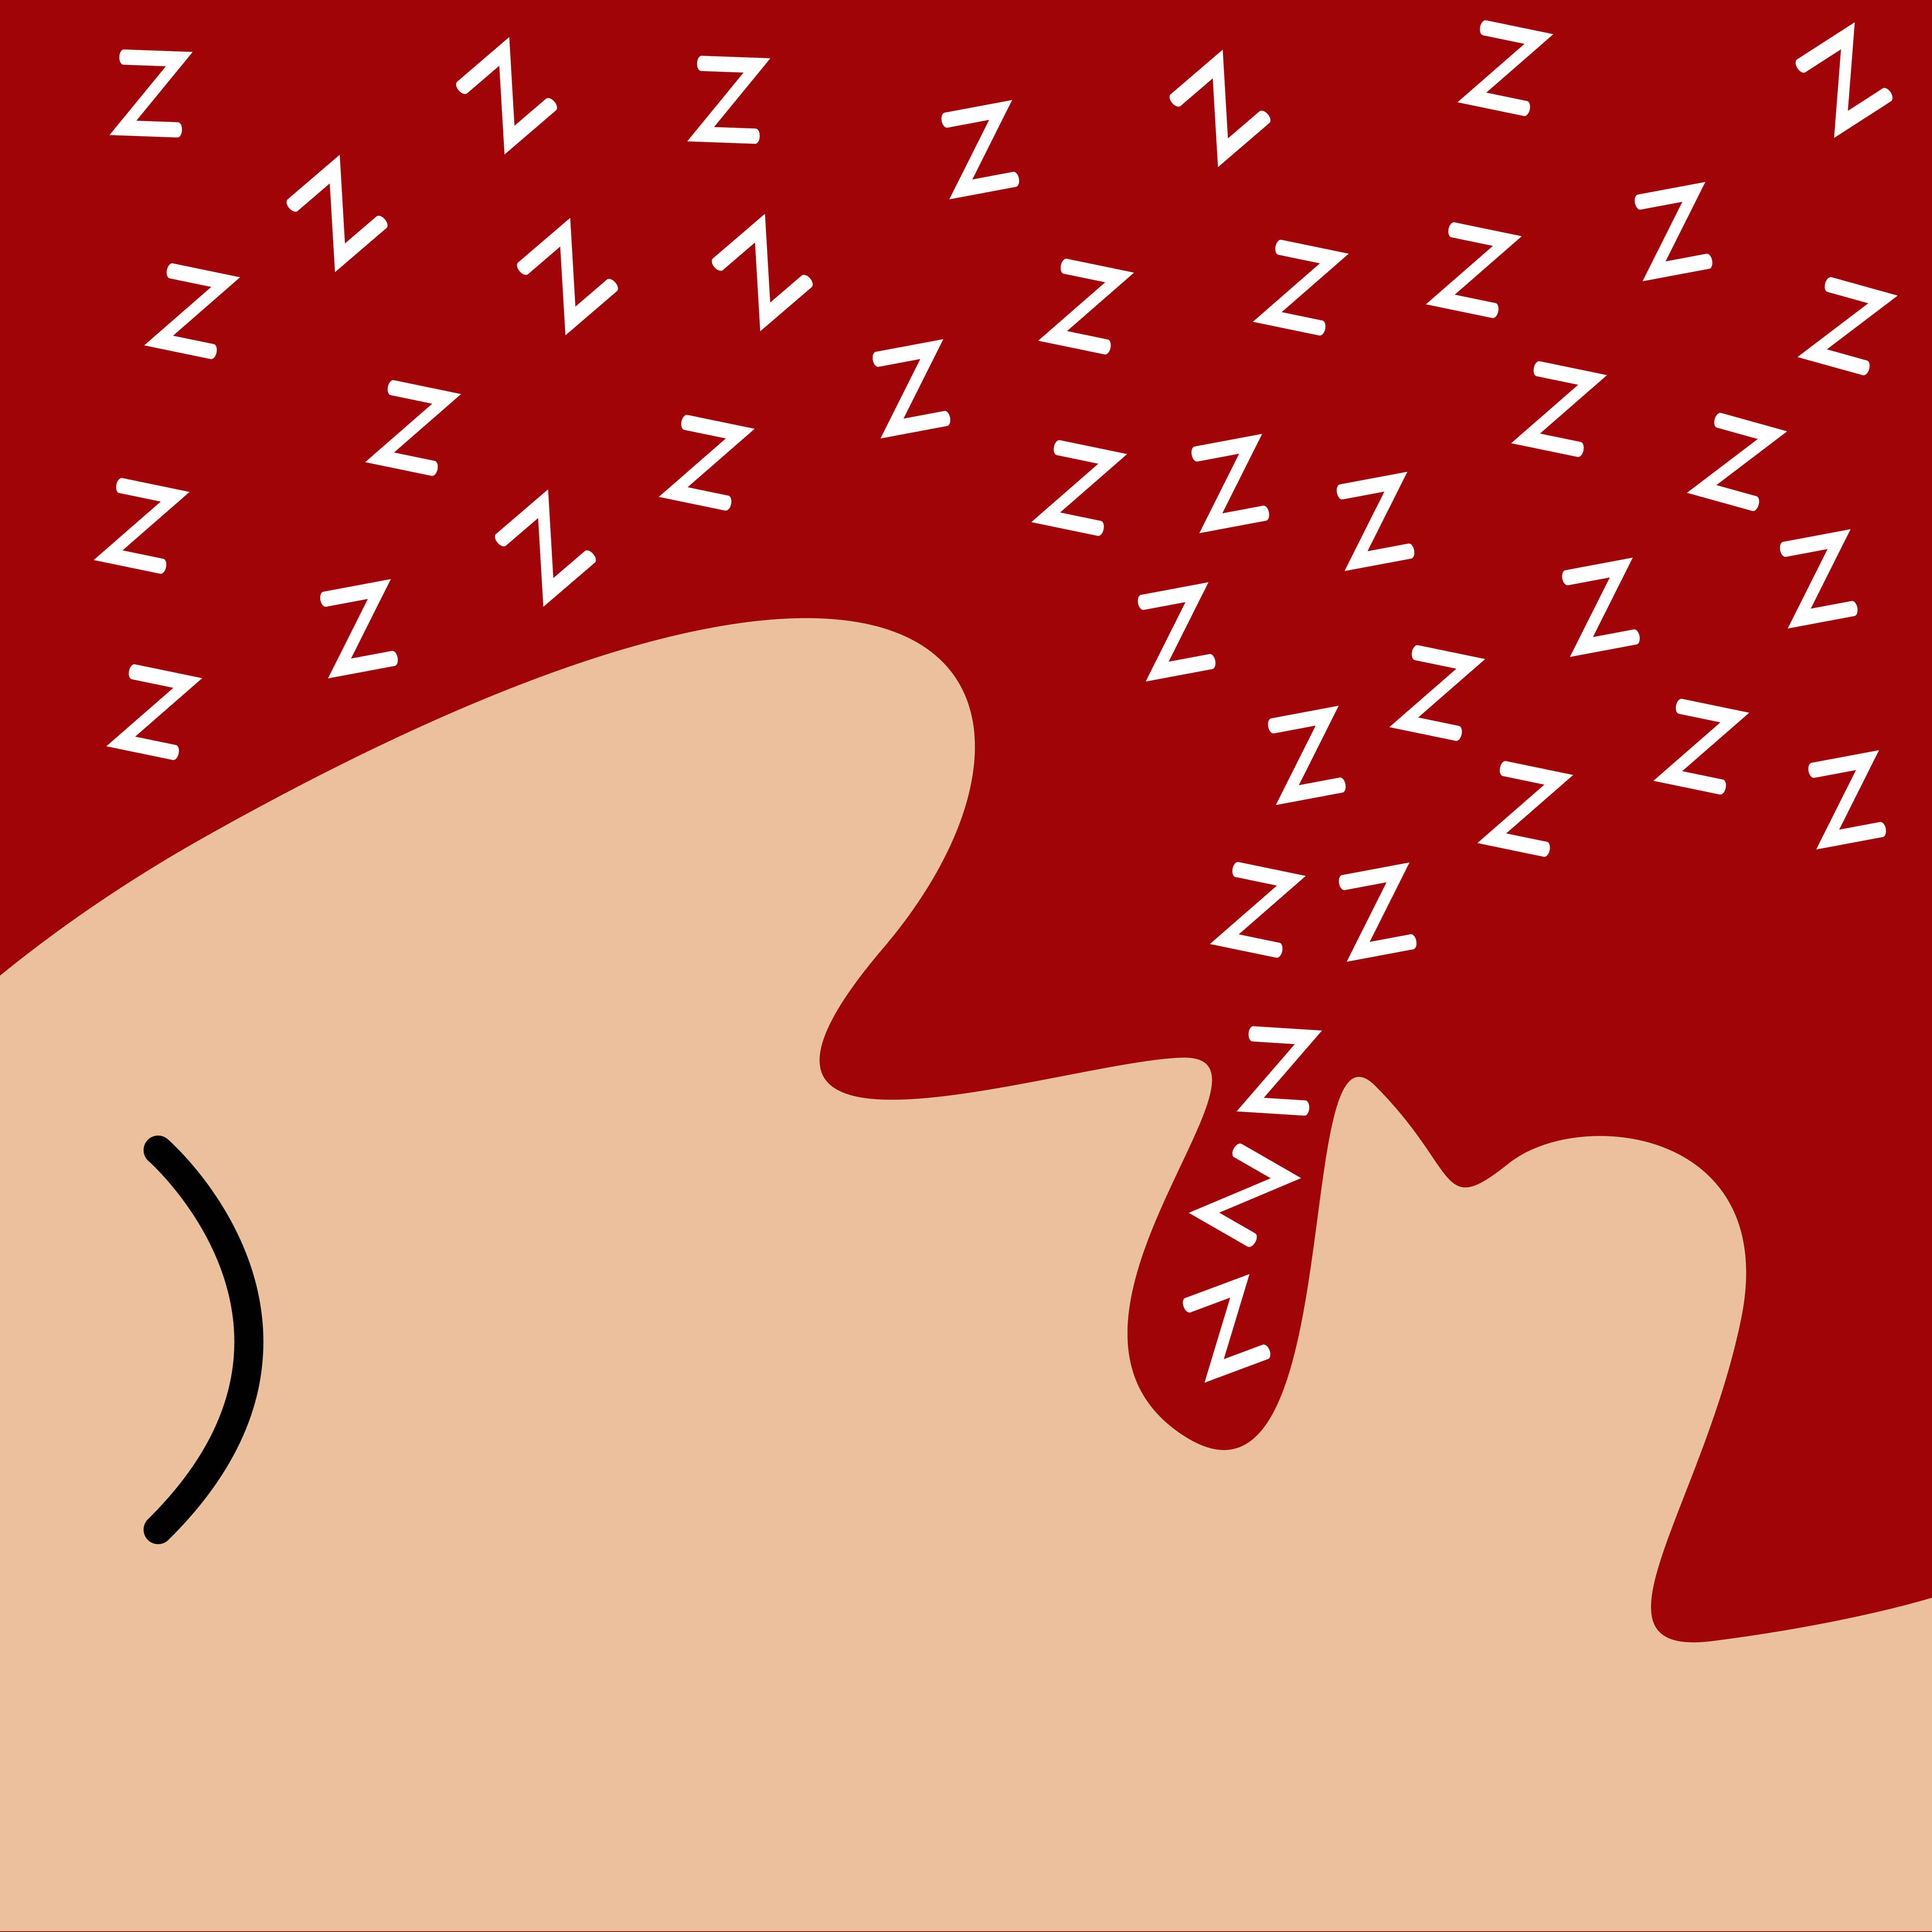 An illustration of a sleeping person illustrated by Dr. Sean Endsley, a general dentist.